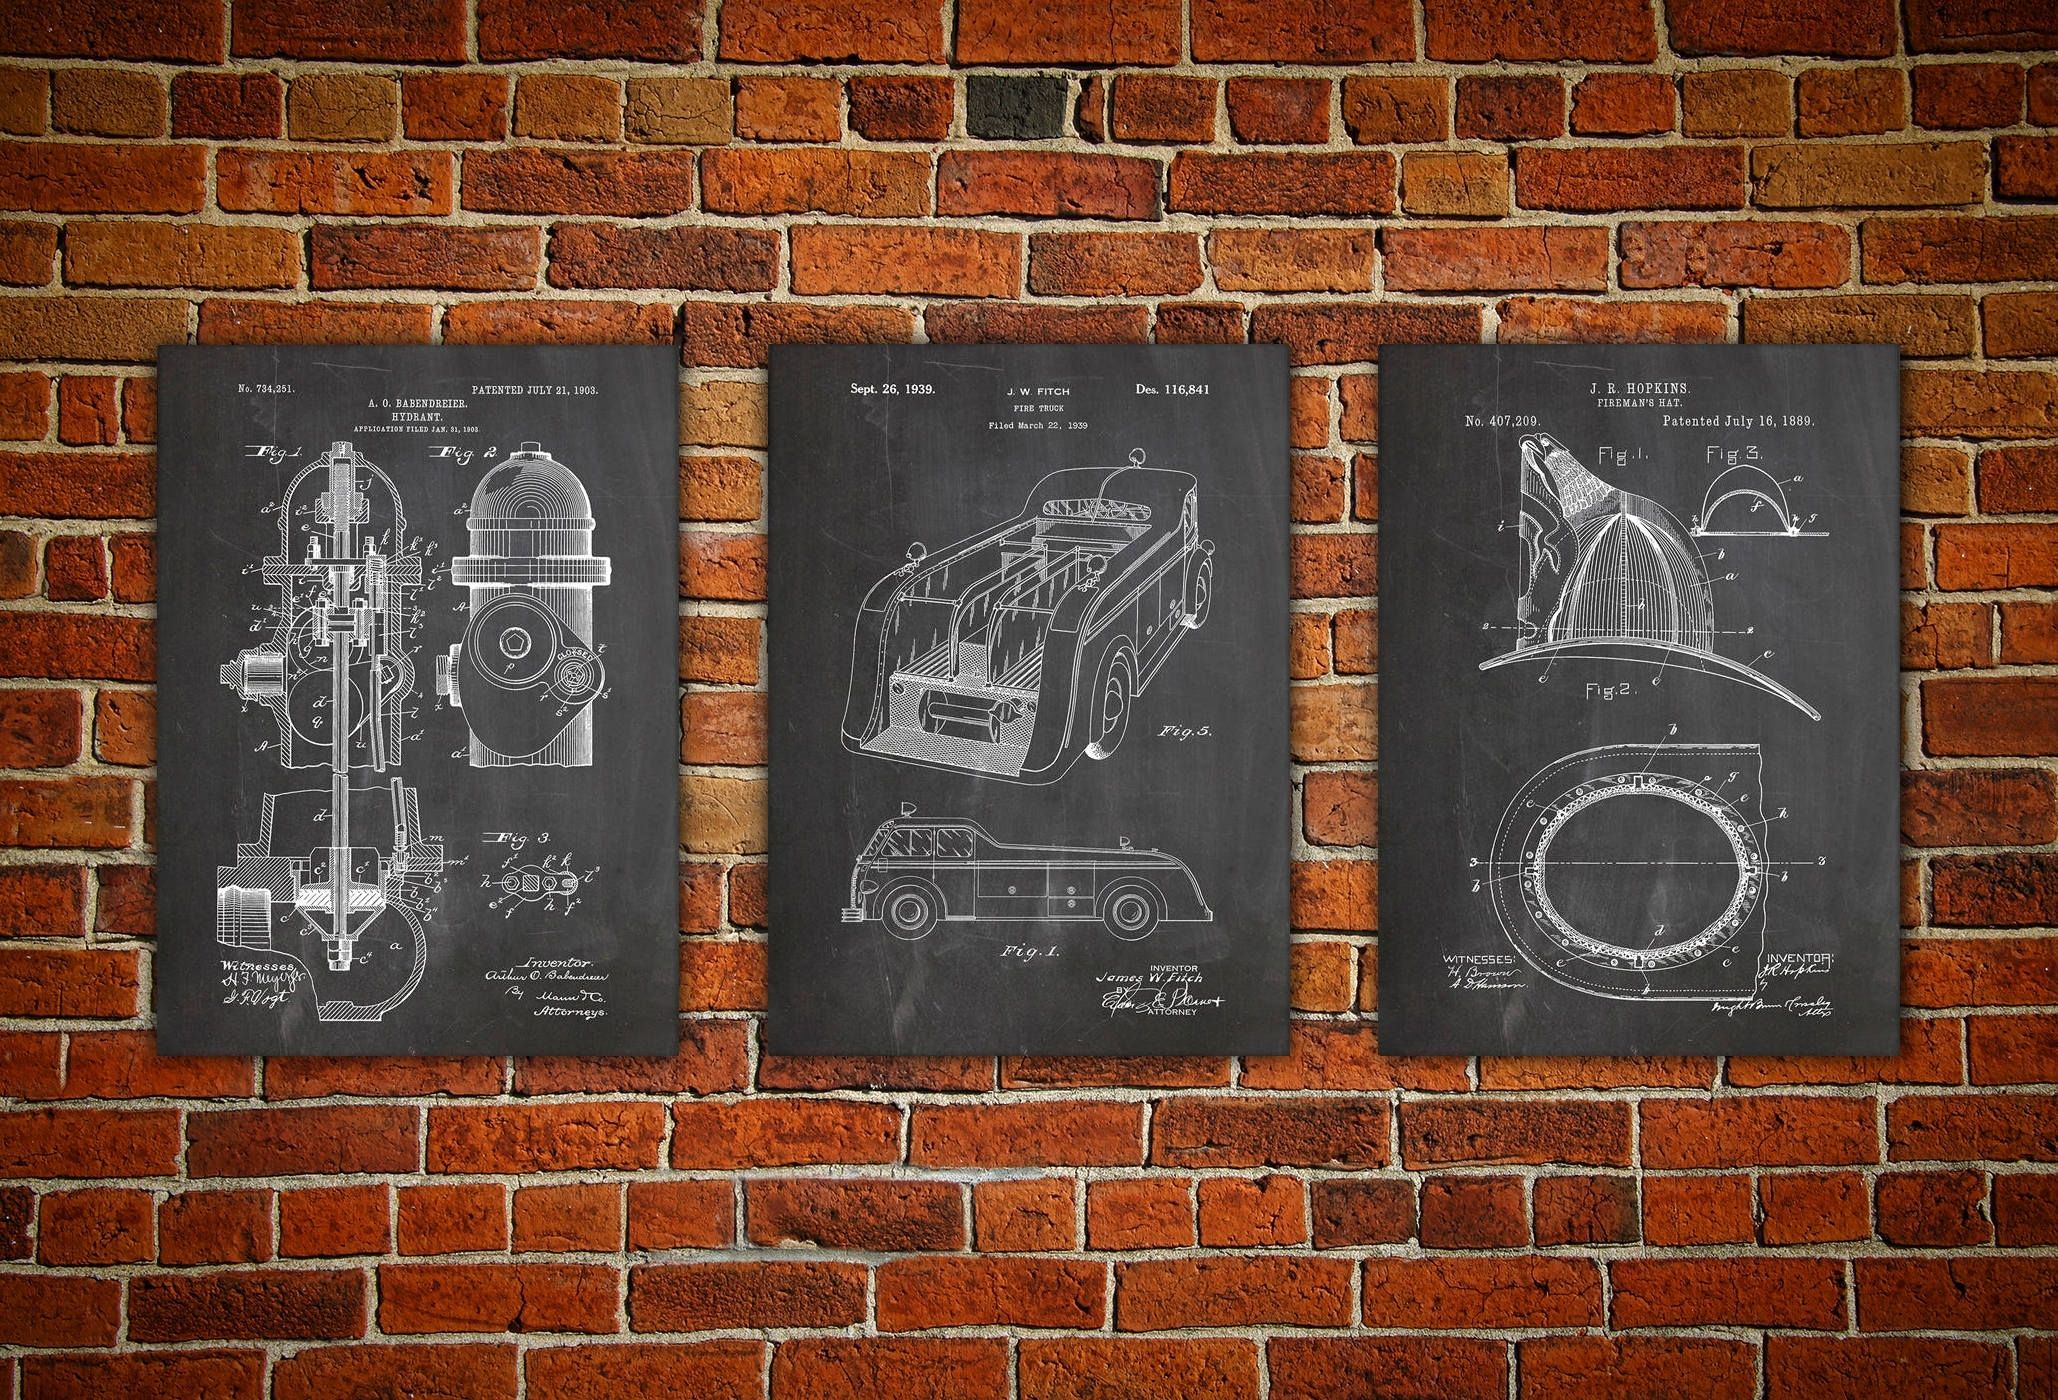 Firefighter Decor Patent Print Poster Group Firefighter Wall | Etsy With Regard To Firefighter Wall Art (View 17 of 20)